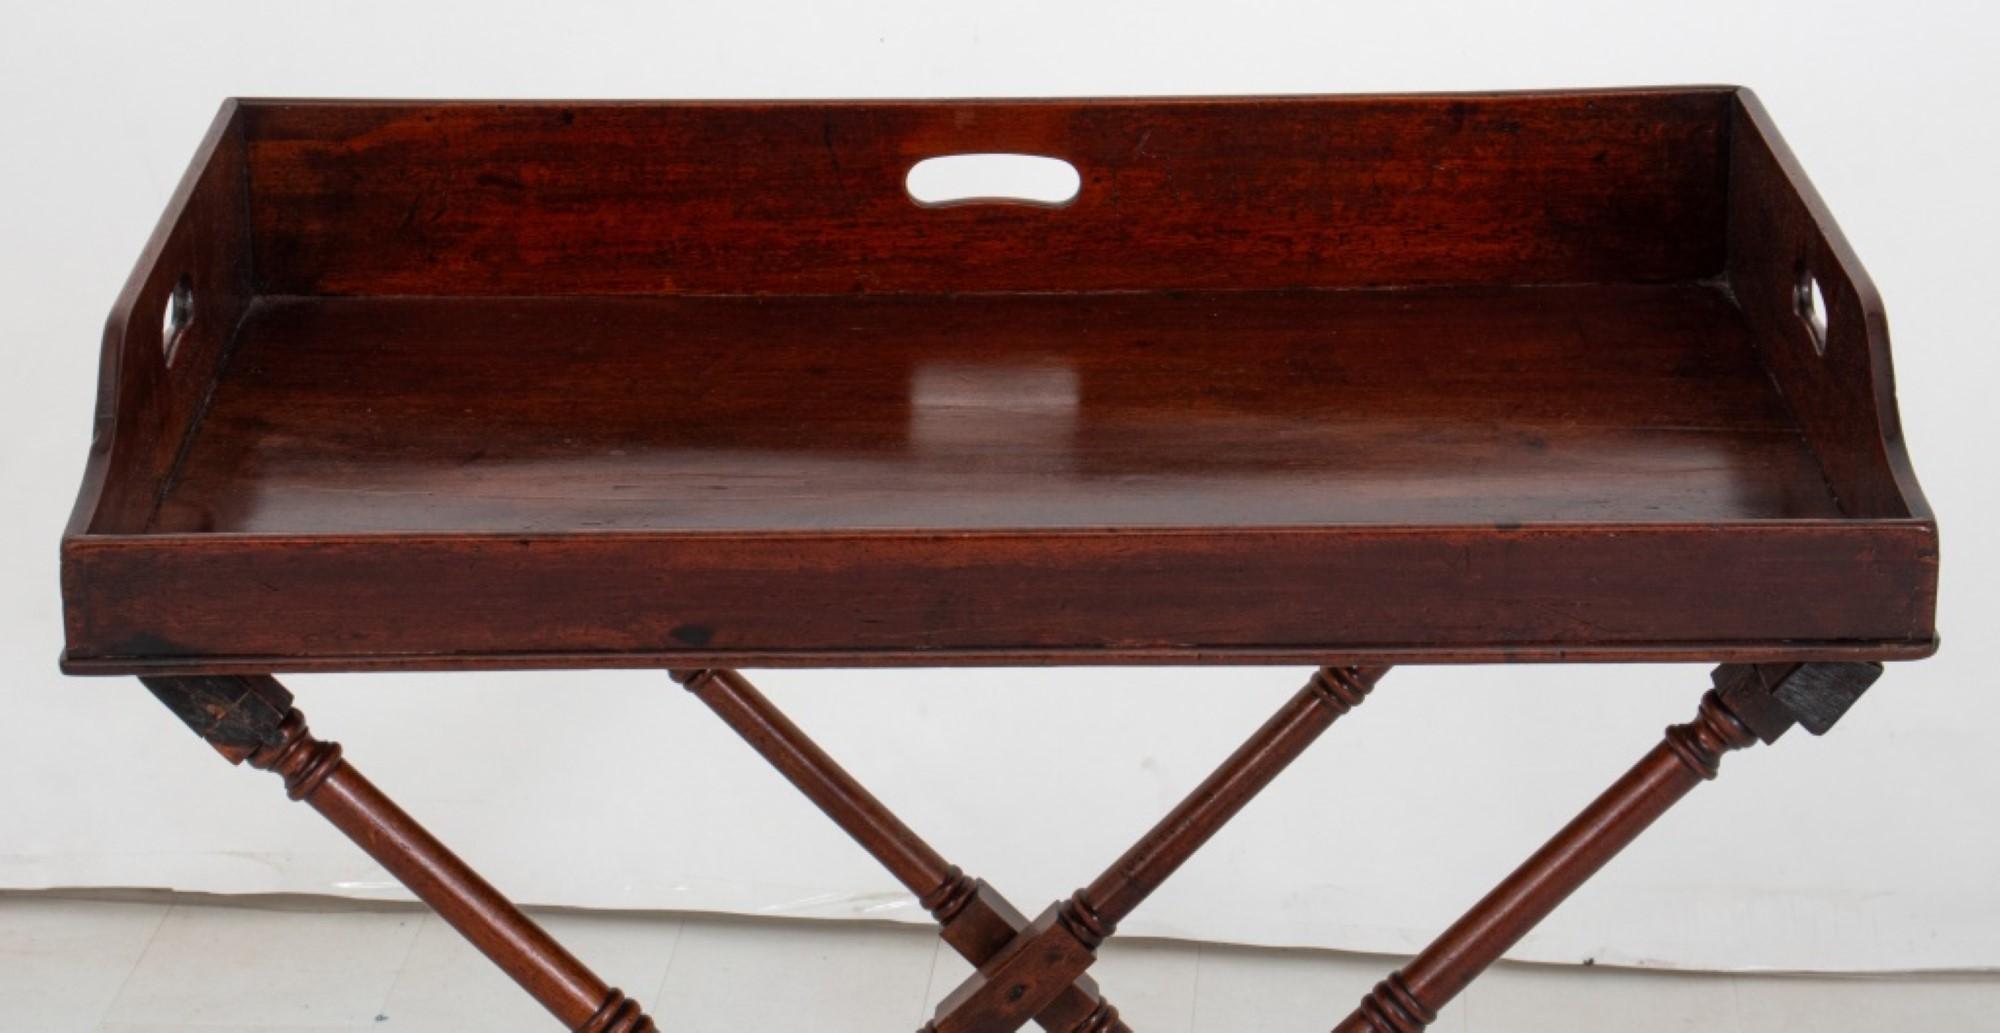 Edwardian Mahogany Butler Tray on Stand, ca. 1910 For Sale 5